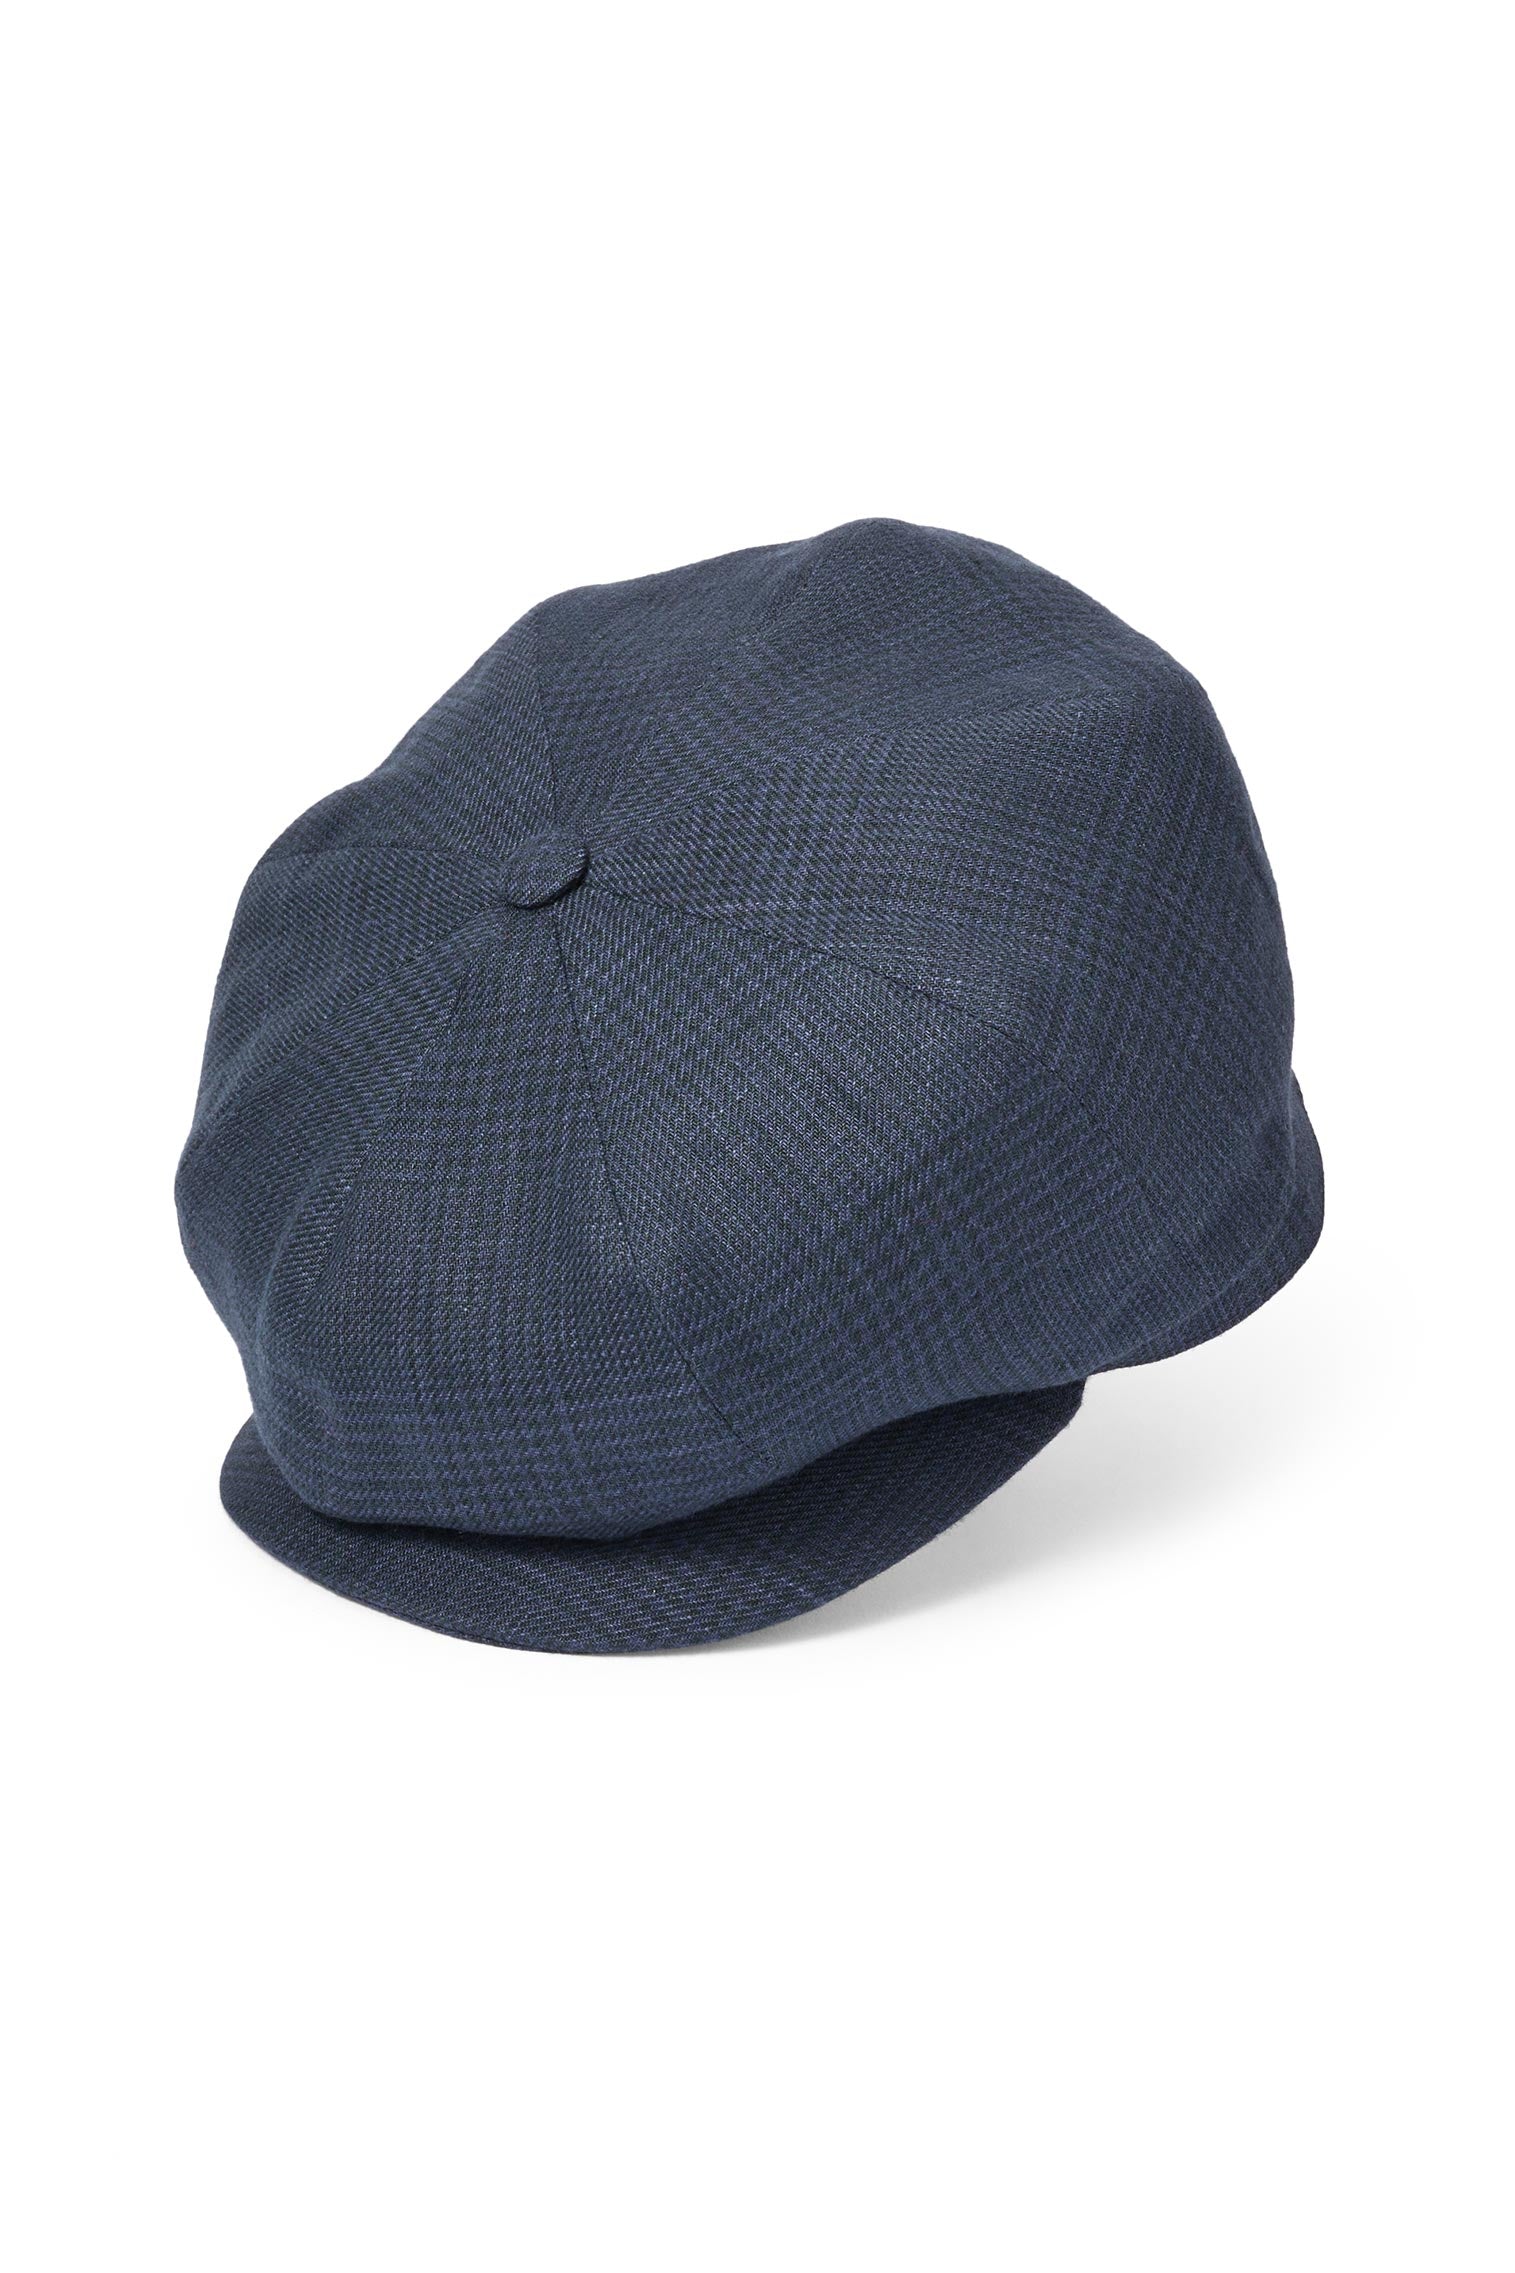 Tremelo Linen Navy Check Bakerboy Cap - New Season Hat Collection - Lock & Co. Hatters London UK